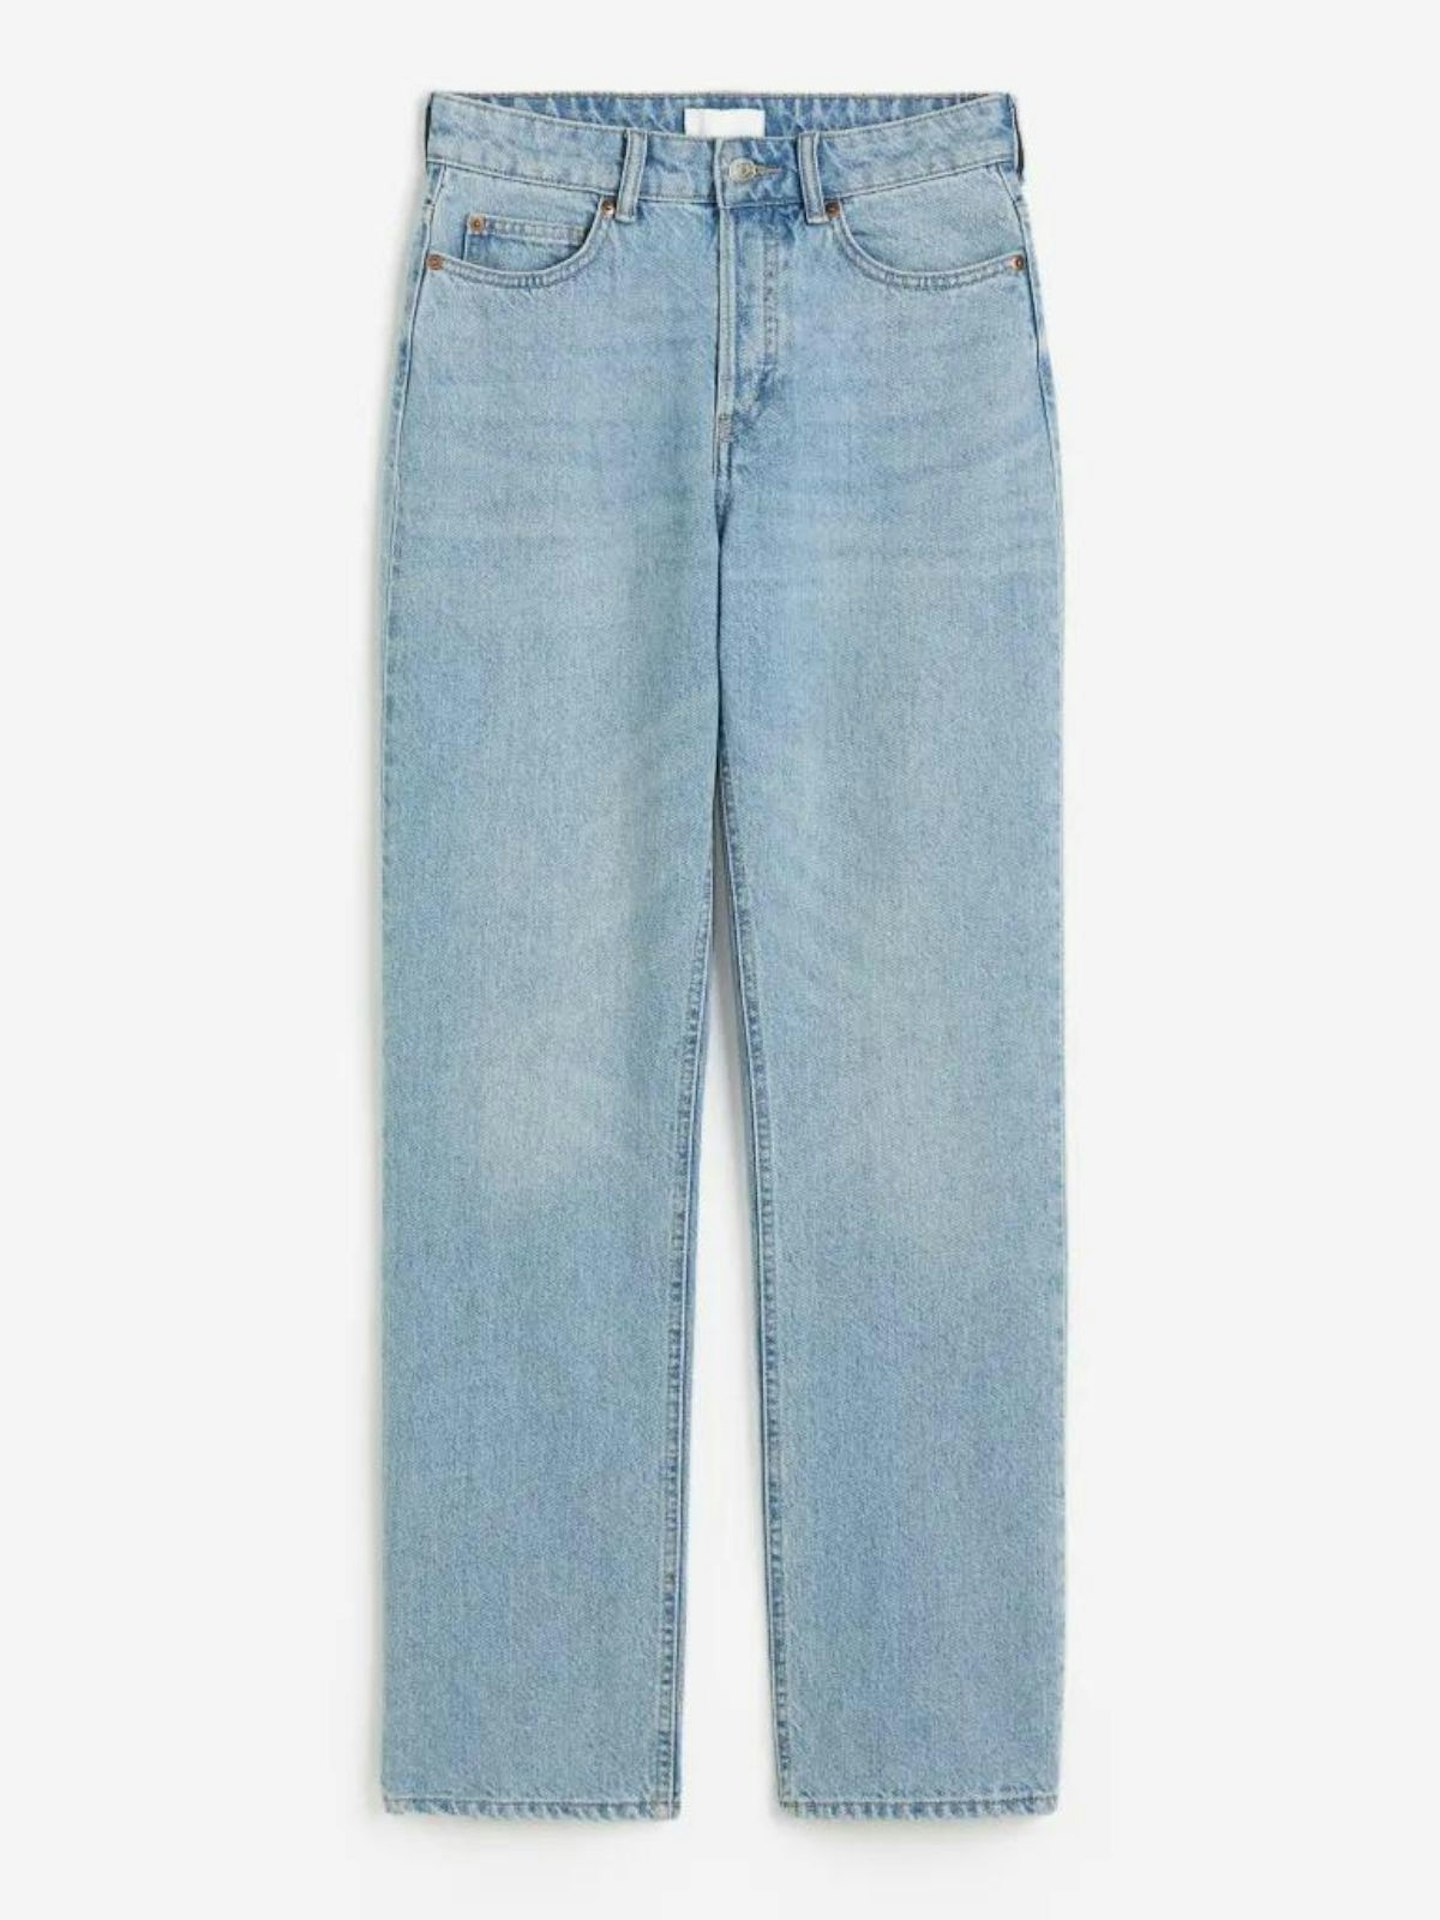 H&M Straight High Jeans